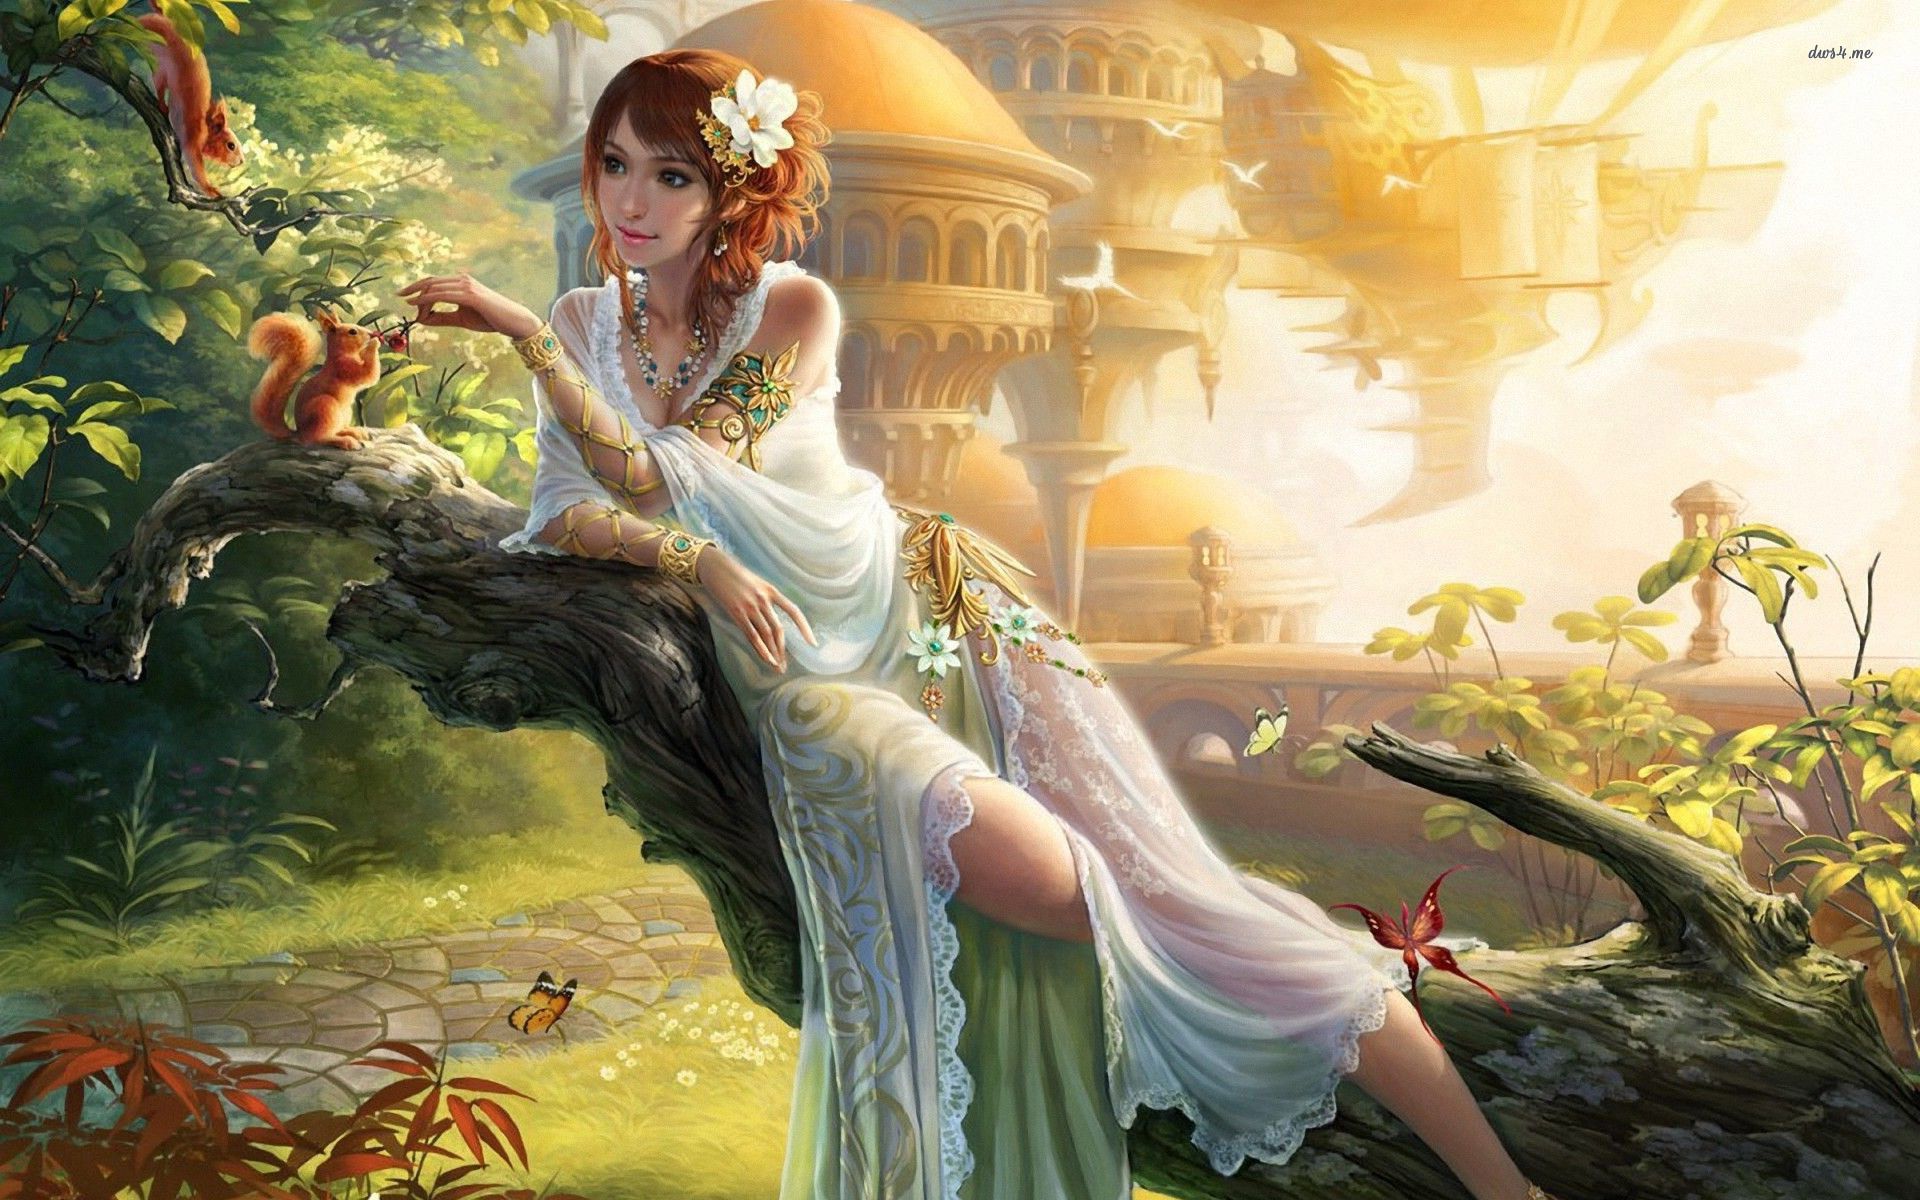 1920x1200 Free Download For 27042 Fairy Sitting On A Tree Trunk 19201200 Fantasy Wallpaper 1920x1200 For Your Desktop Mobile Tablet Explore Spring Fairy Desktop Wallpaper Free Fairy Wallpaper For